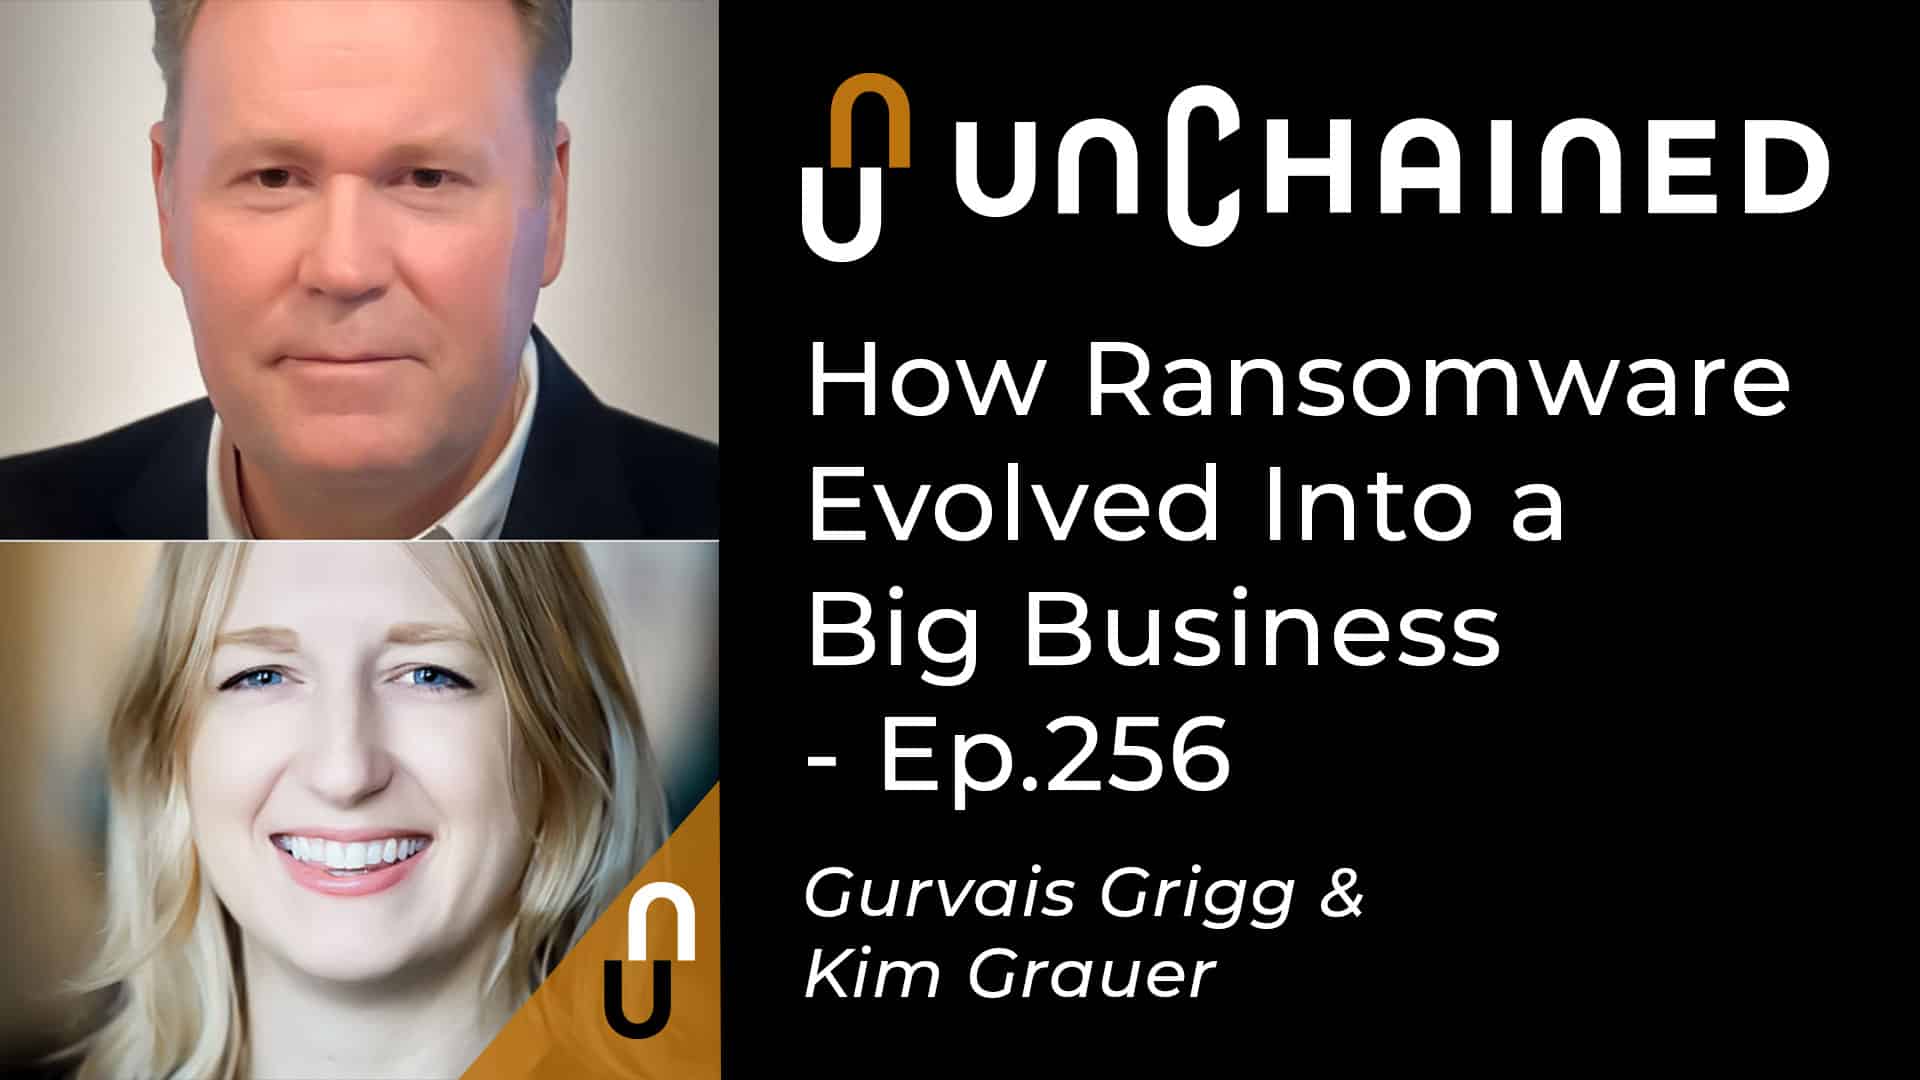 Unchained - Ep.256 - How Ransomware Evolved Into a Big Business